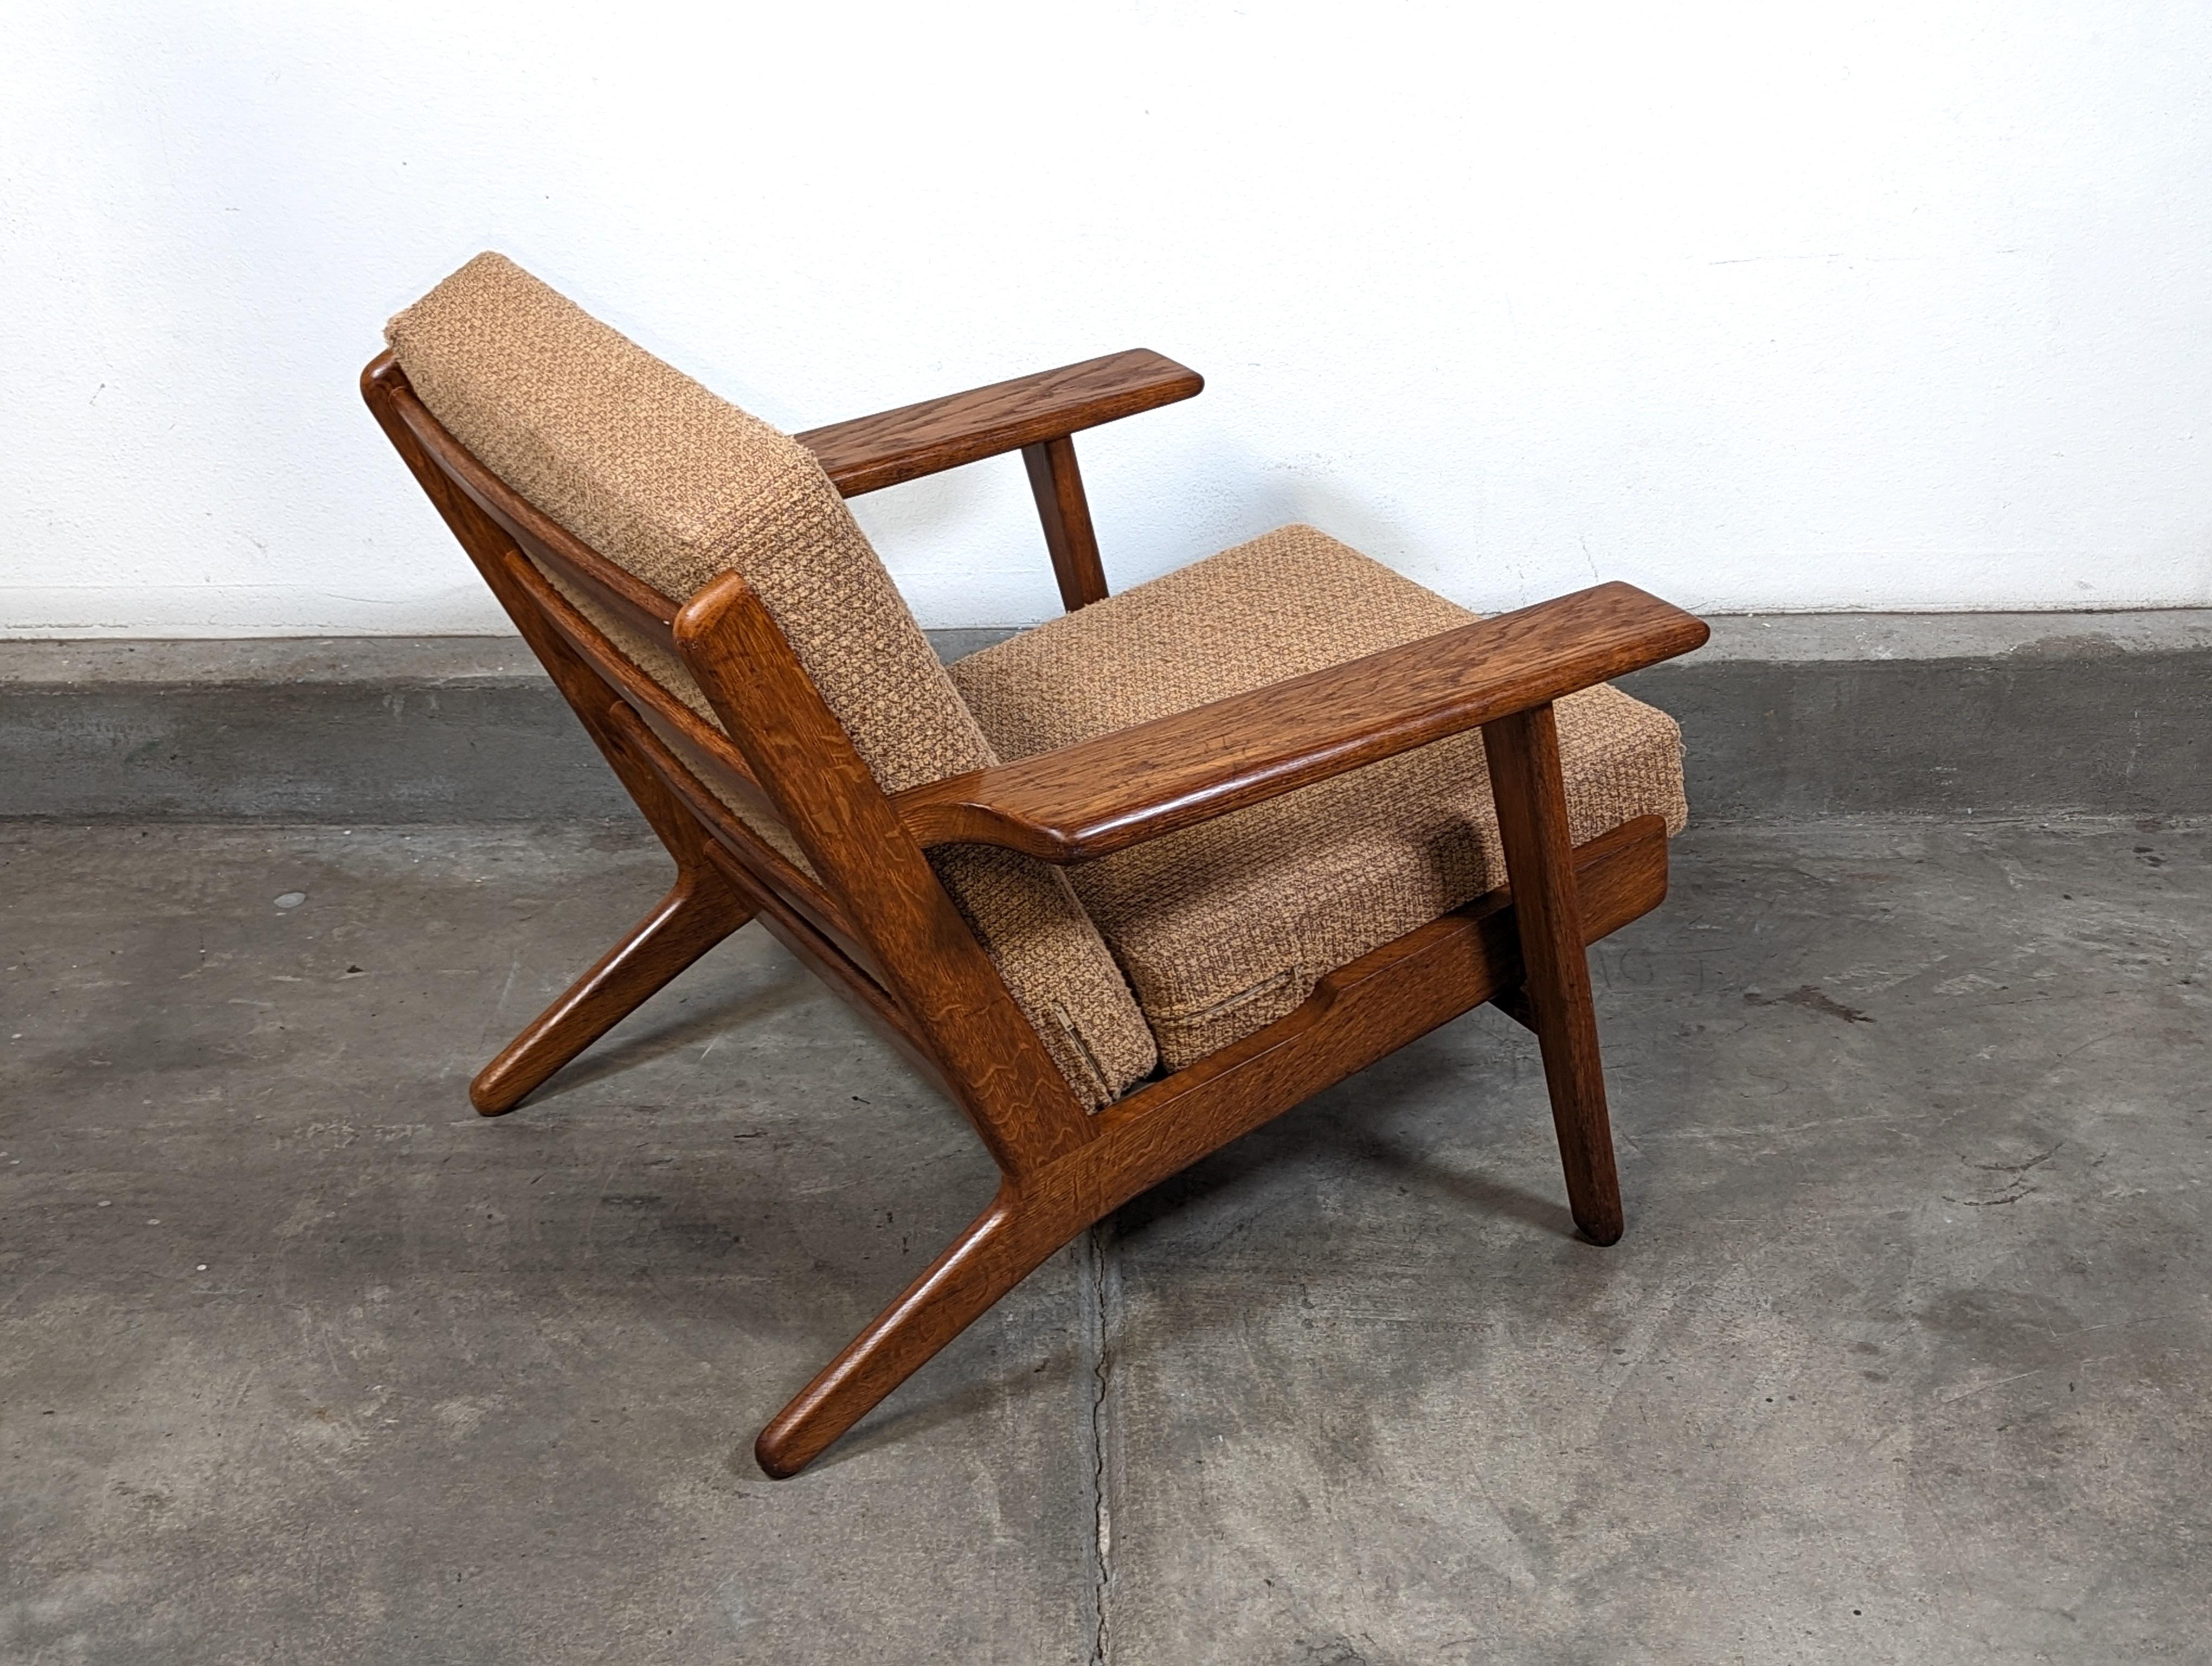 Step back in time to the height of Danish design with this authentic mid-century modern lounge chair designed by the legendary Hans Wegner, produced by the esteemed Getama company. Dating back to the 1960s, this timeless piece embodies the clean